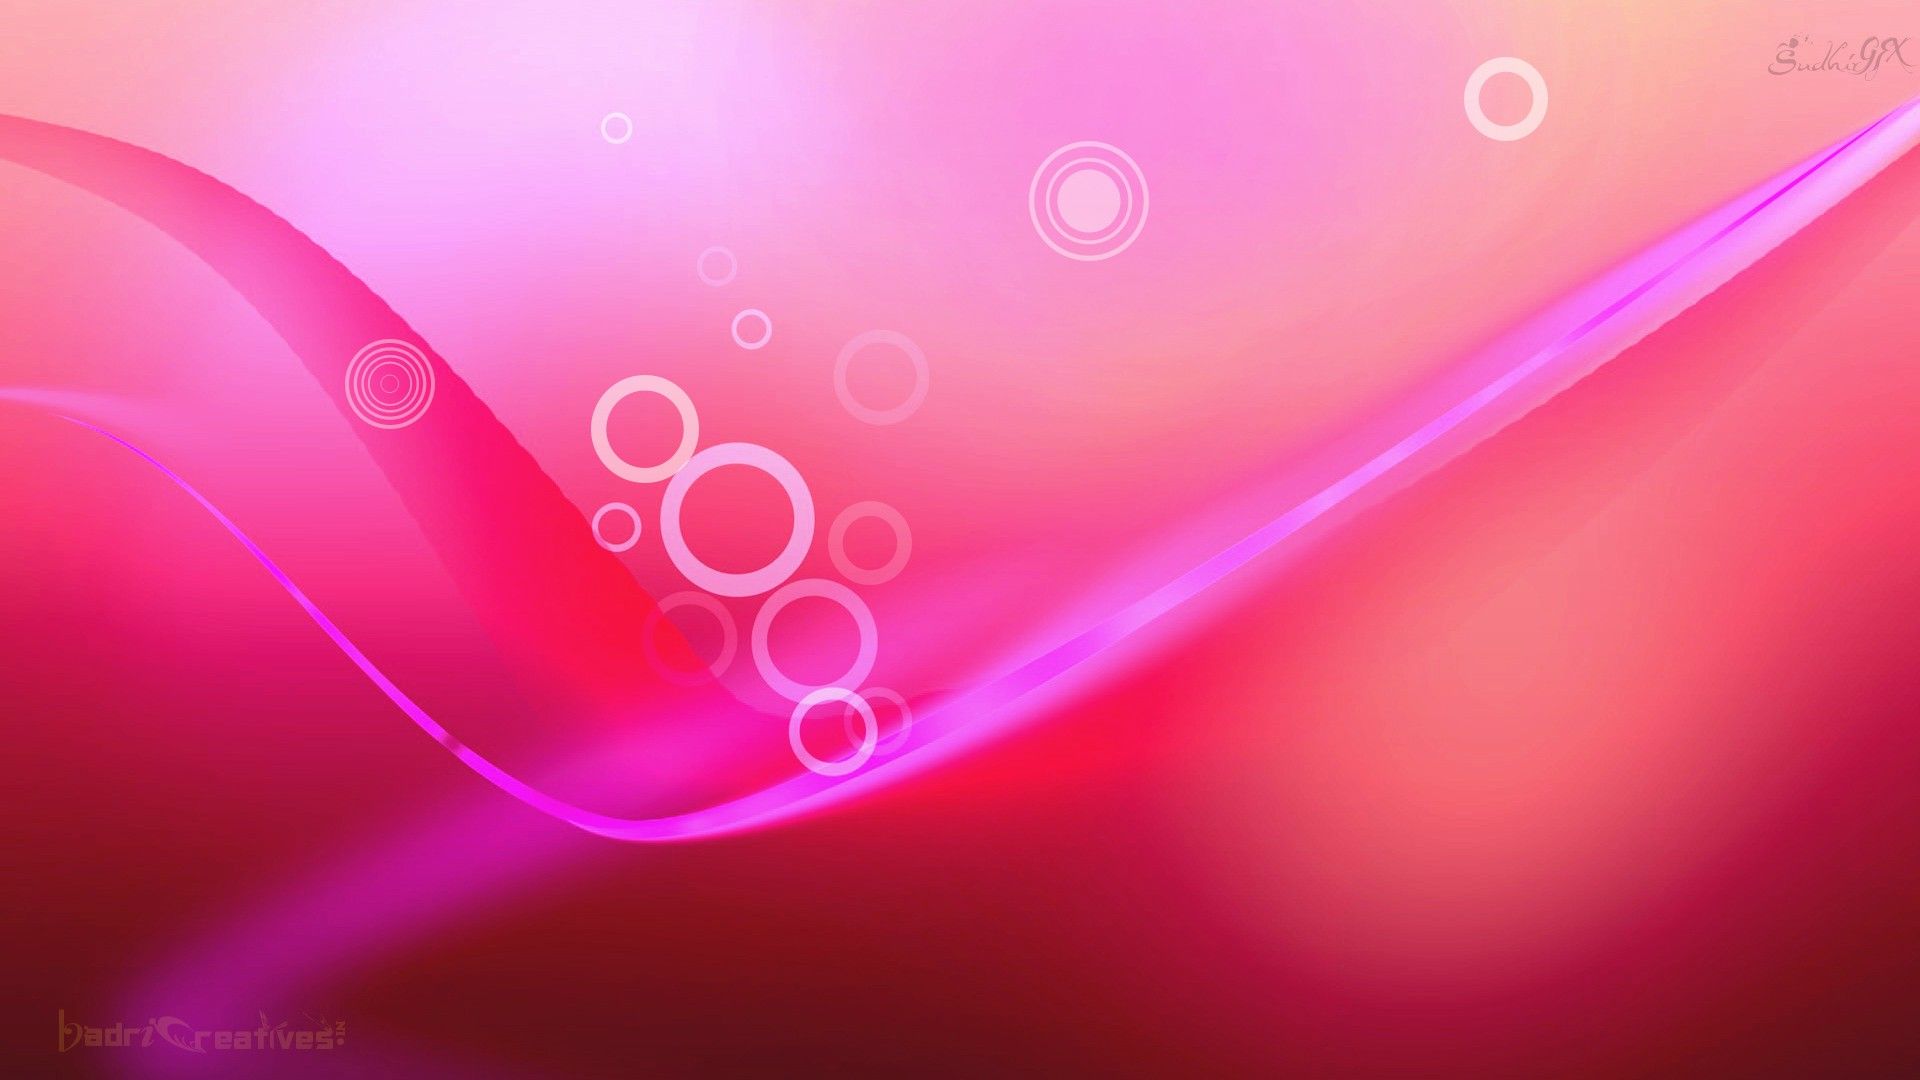 Pink Bubble, Hdq Cover Image, Iordan Corryer - Background Pink Fanta , HD Wallpaper & Backgrounds